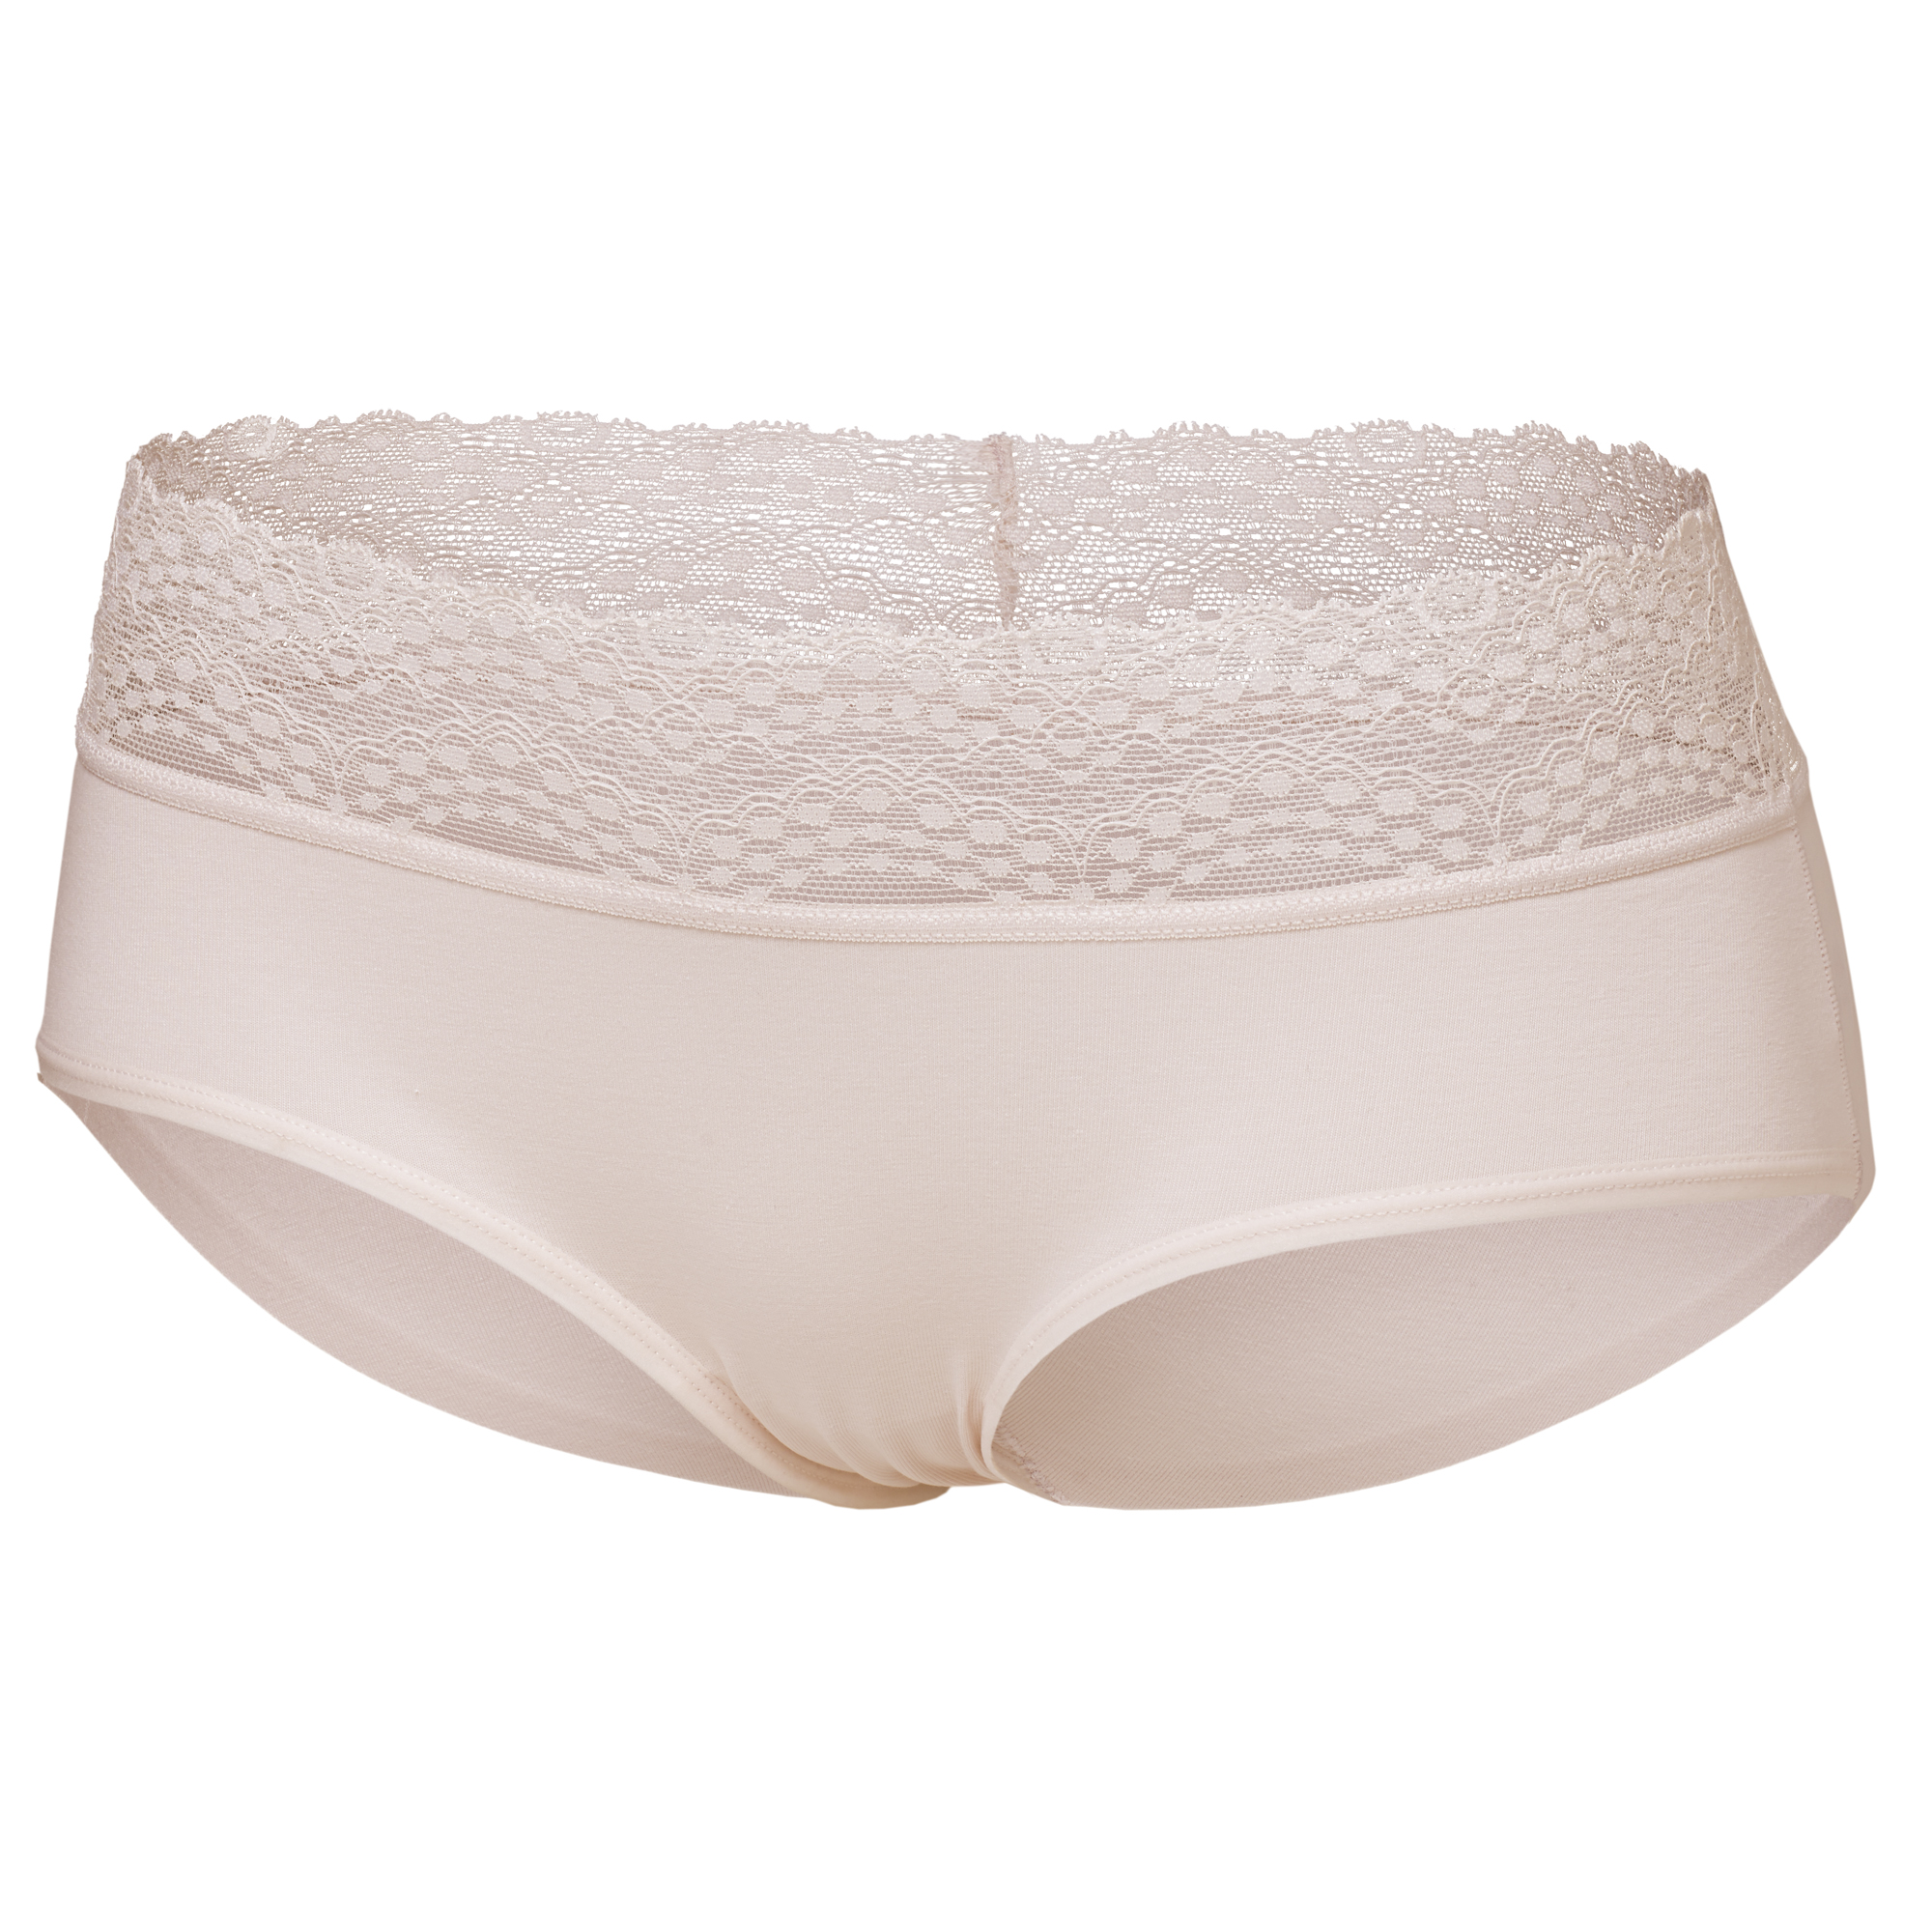 INVISIBLE COTTON HIPSTER LACE WHITE SAND, white sand (web), hi-res